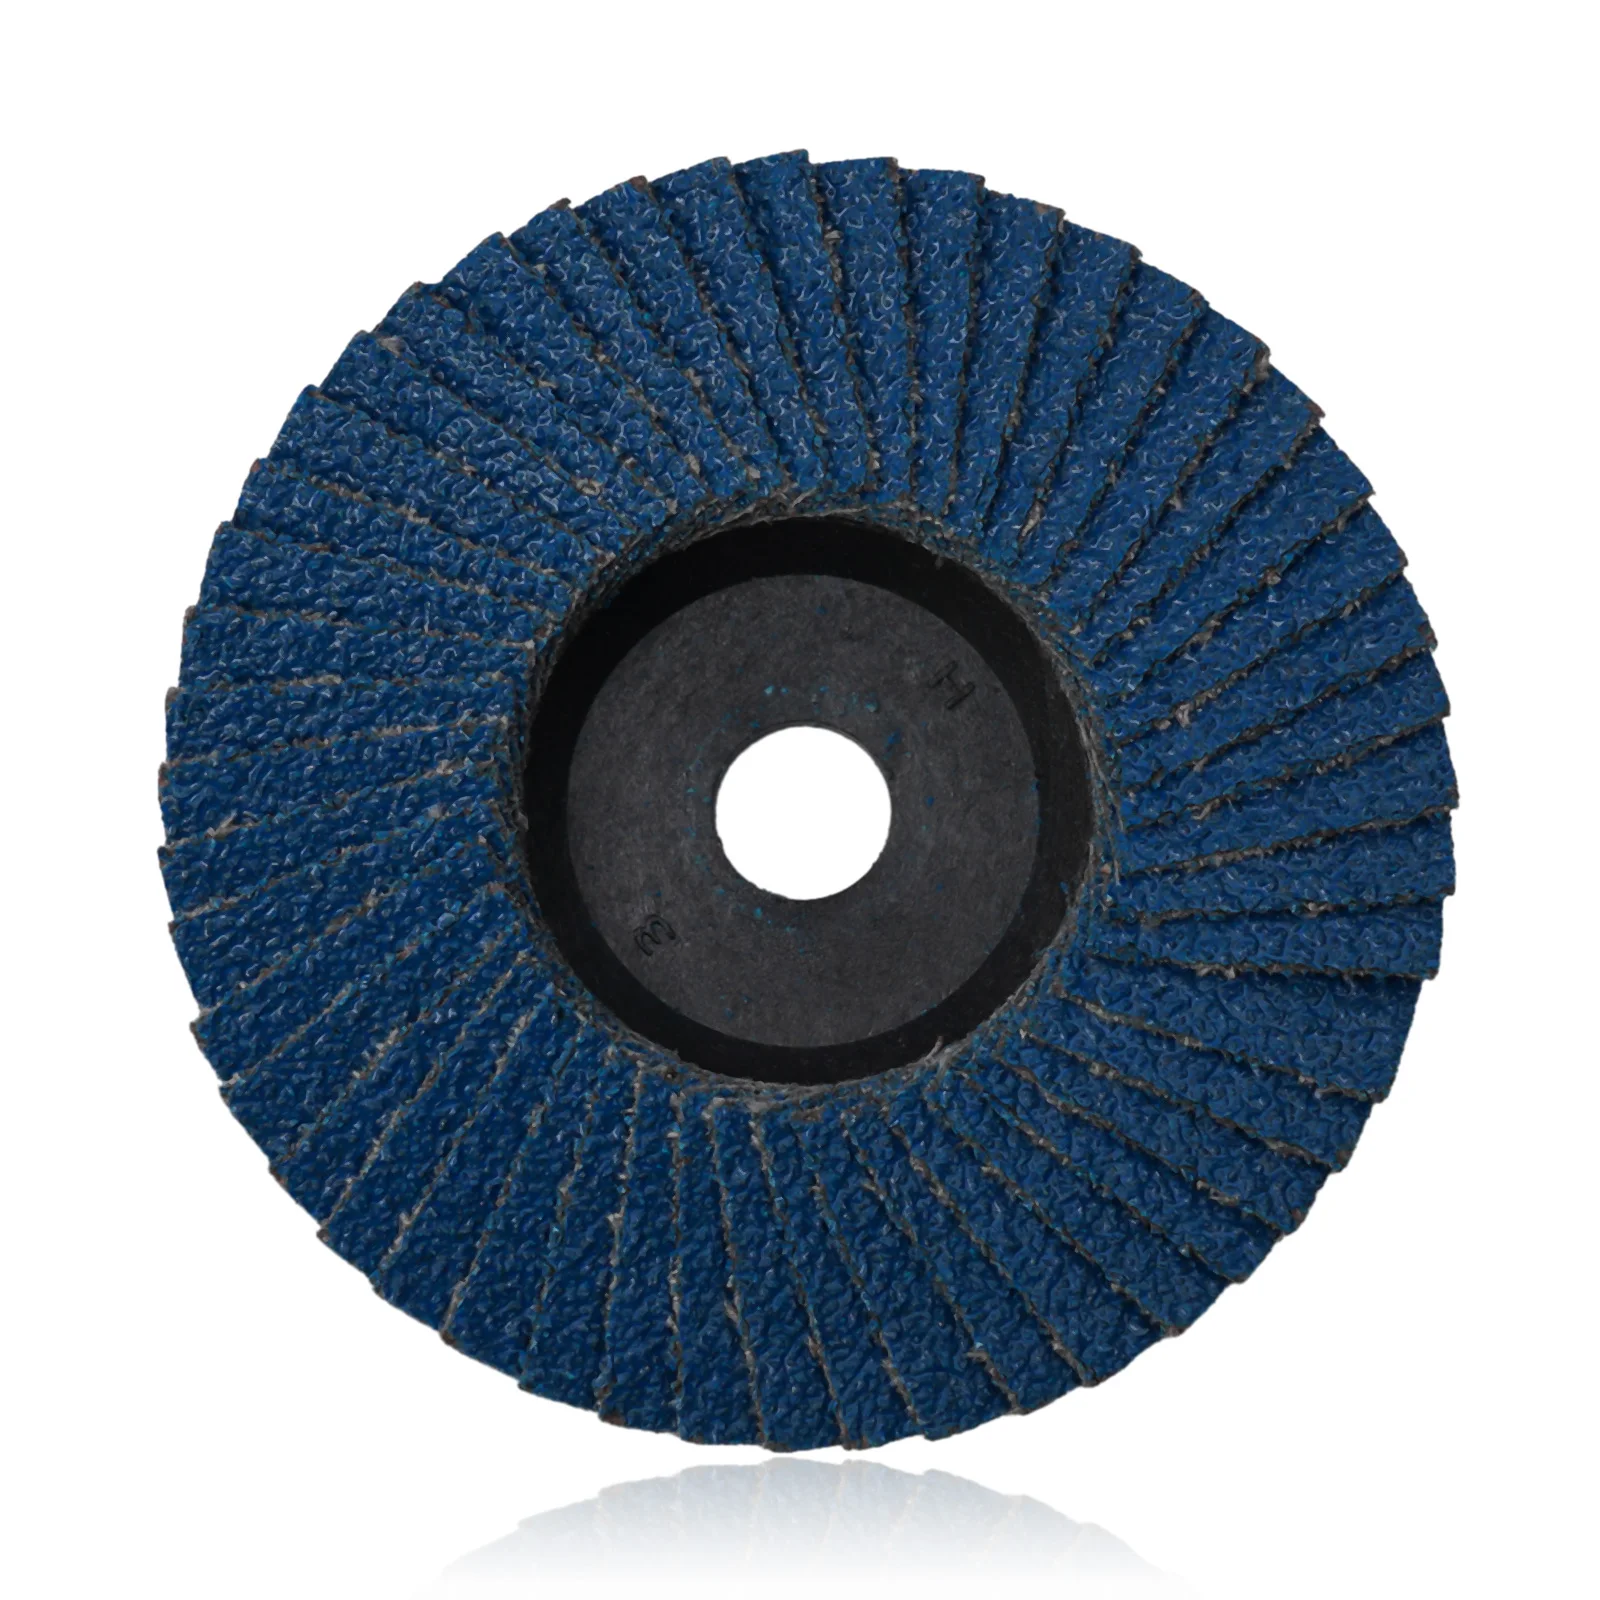 15Pcs 75mm Grinding Cutting Disc Circular Resin Saw Blade For Angle Grinder Steel Stone Cutting Angle Grinding Bit